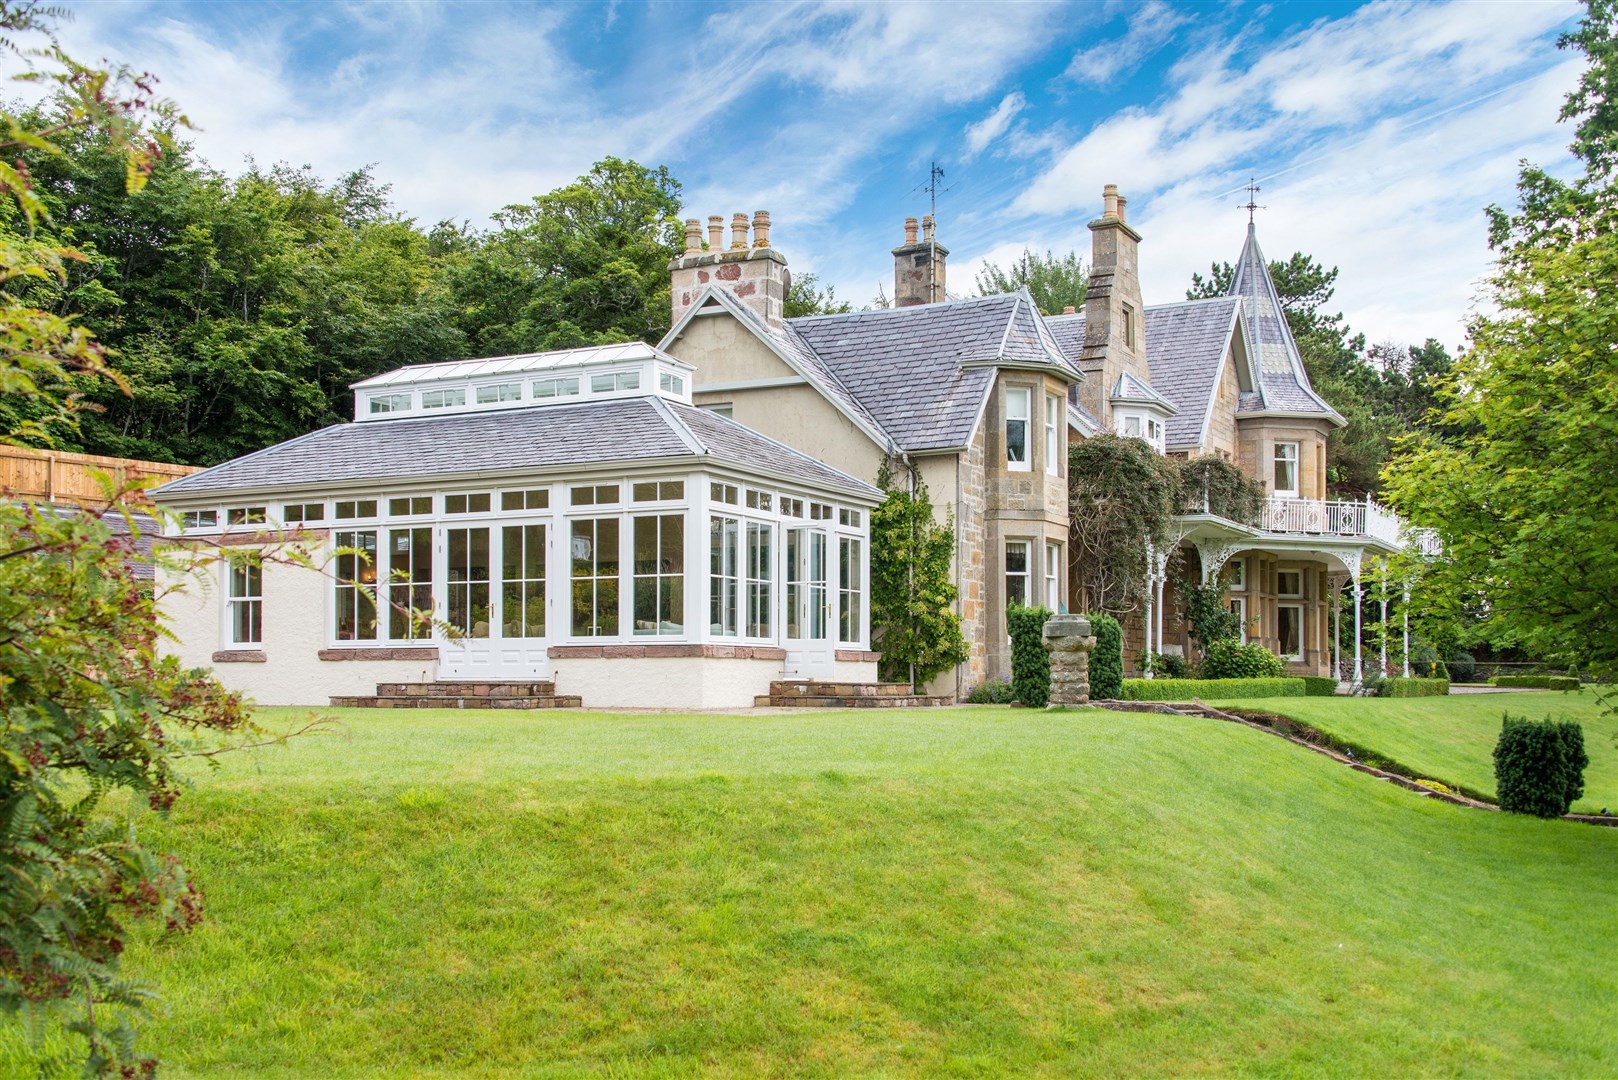 Kessock House comes with an price tag not far short of £1m.